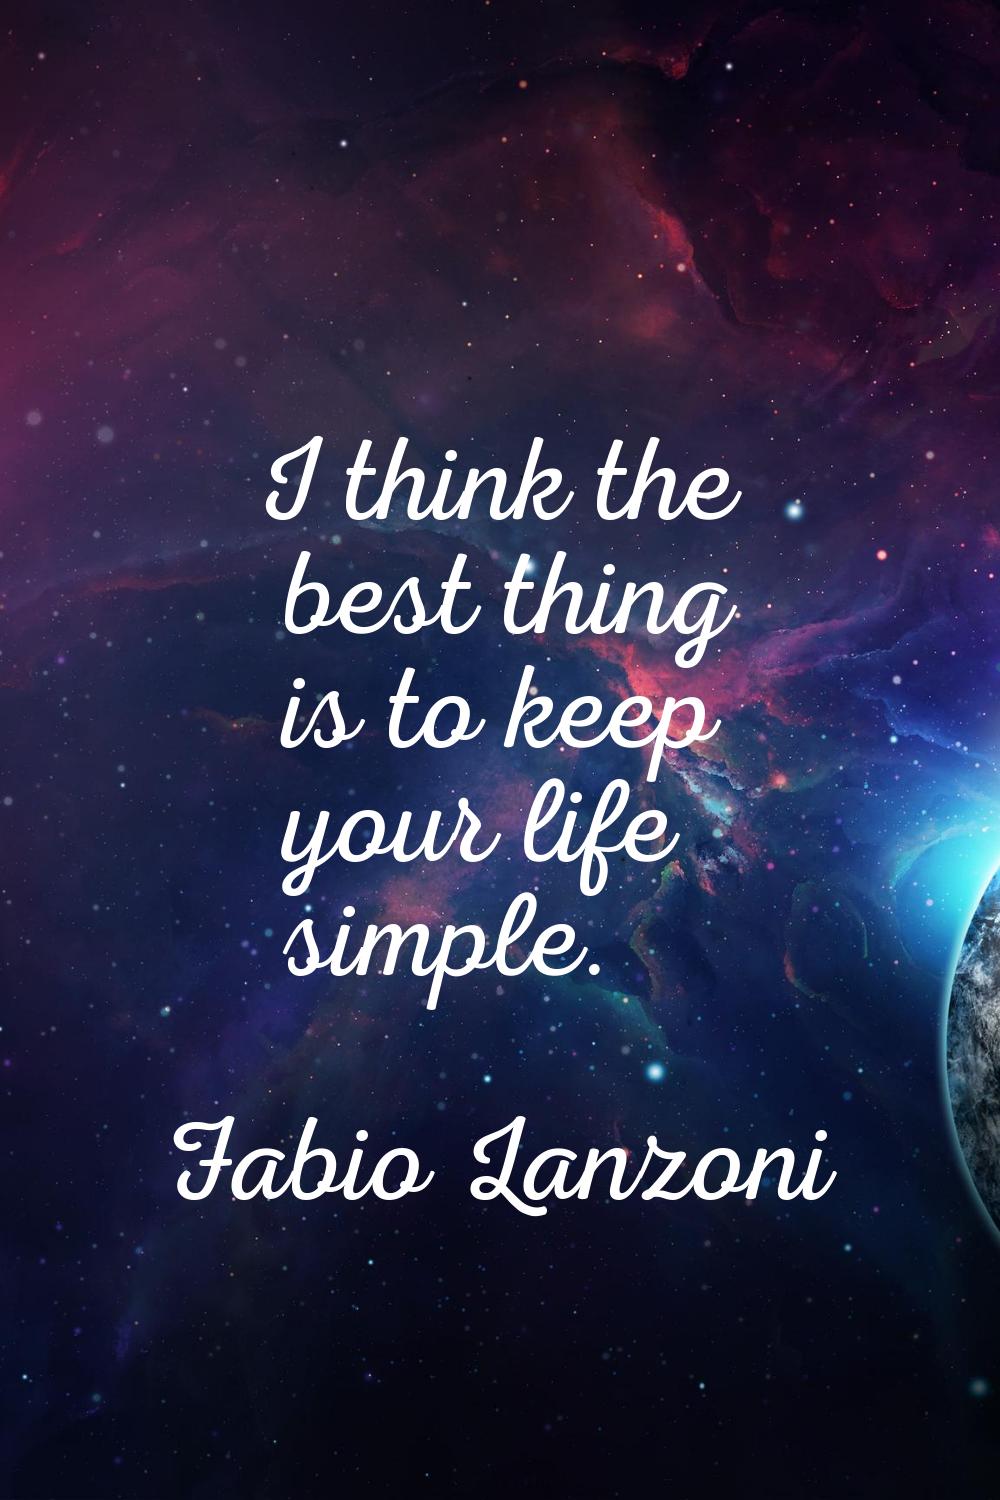 I think the best thing is to keep your life simple.